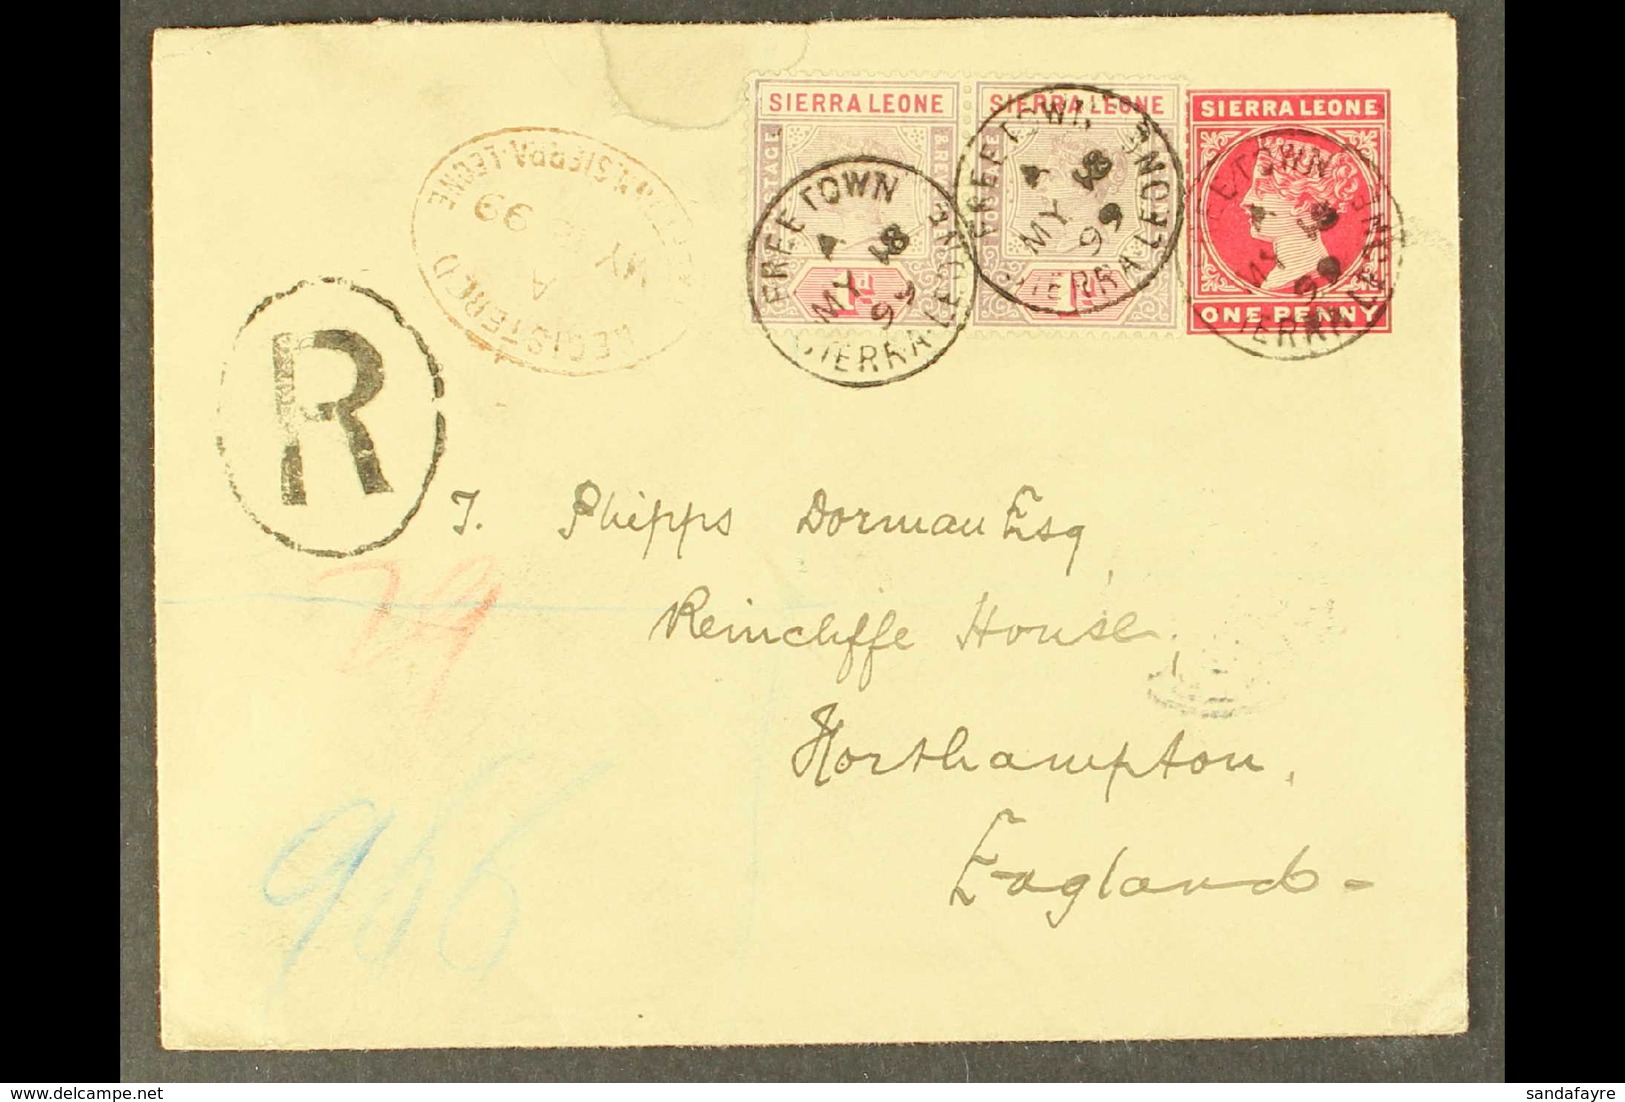 1899 (May) 1d Stationery Envelope Registered To England, Bearing Additional 1d Pair, Tied Freetown Cds's, Oval Registere - Sierra Leone (...-1960)